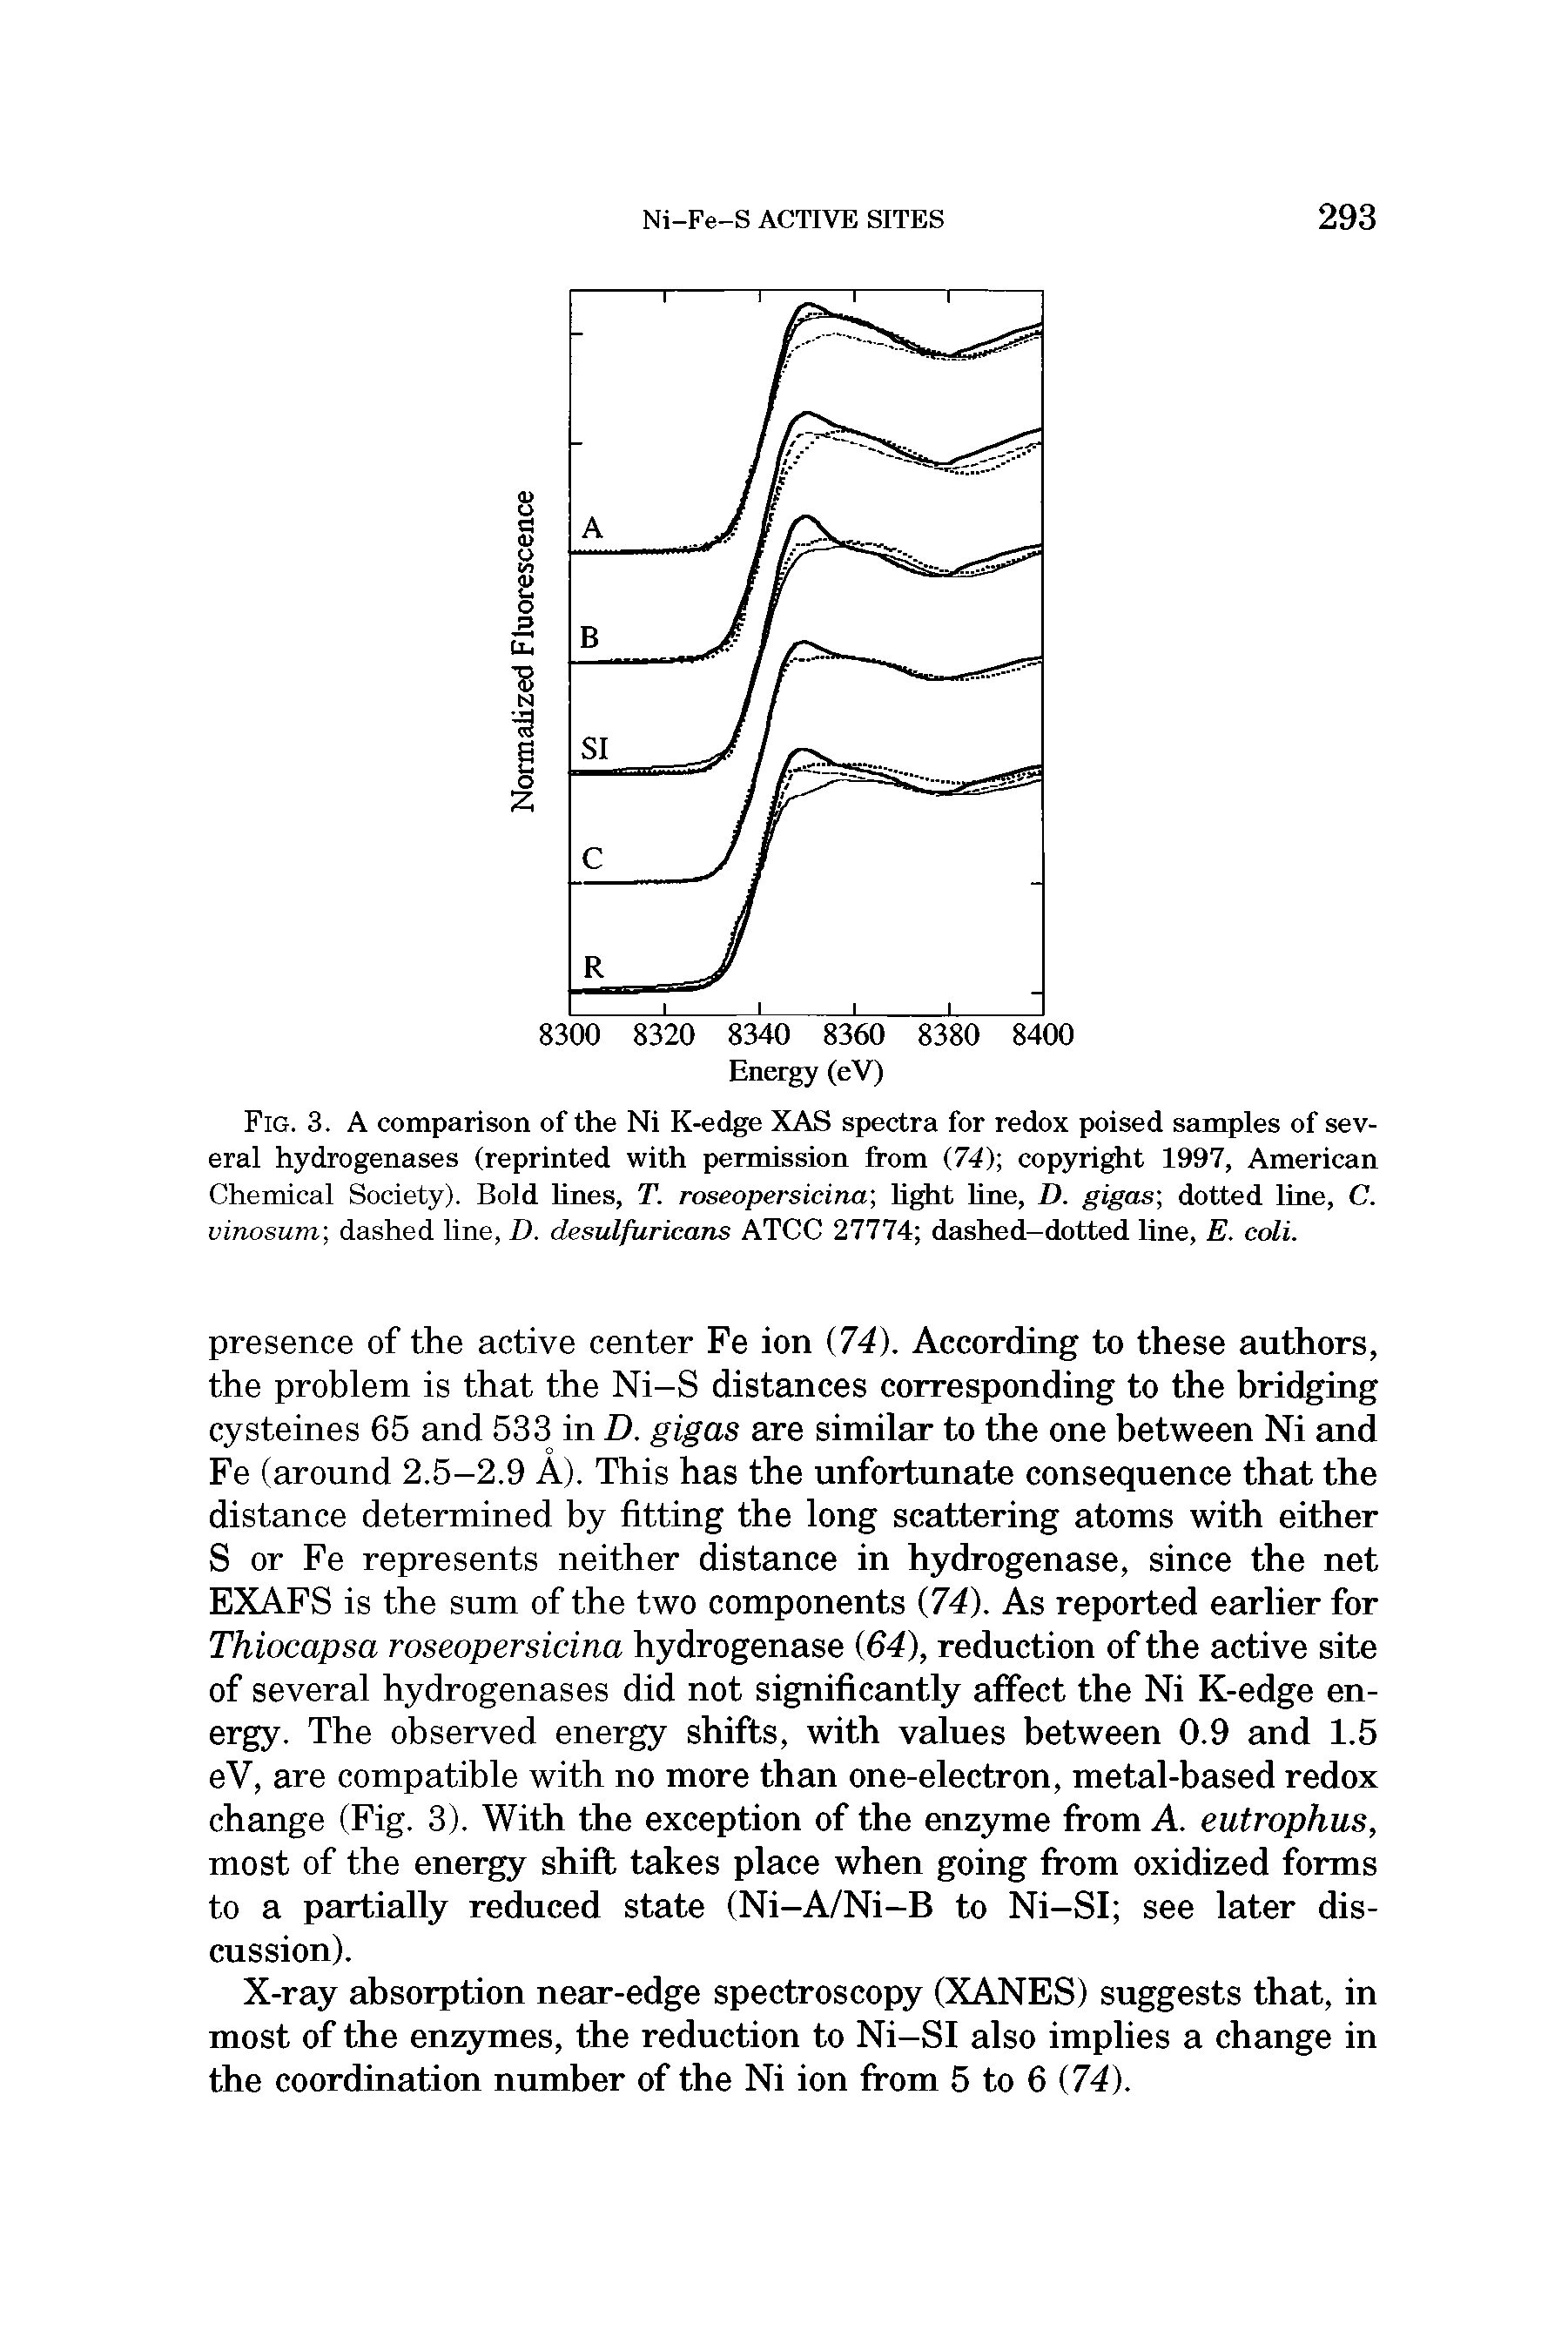 Fig. 3. A comparison of the Ni K-edge XAS spectra for redox poised samples of several hydrogenases (reprinted with permission from 74) copyright 1997, American Chemical Society). Bold hnes, T. roseopersicina hght hne, D. gigas dotted line, C. vinosum dashed line, D. desulfuricans ATCC 27774 dashed-dotted line, E. coli.